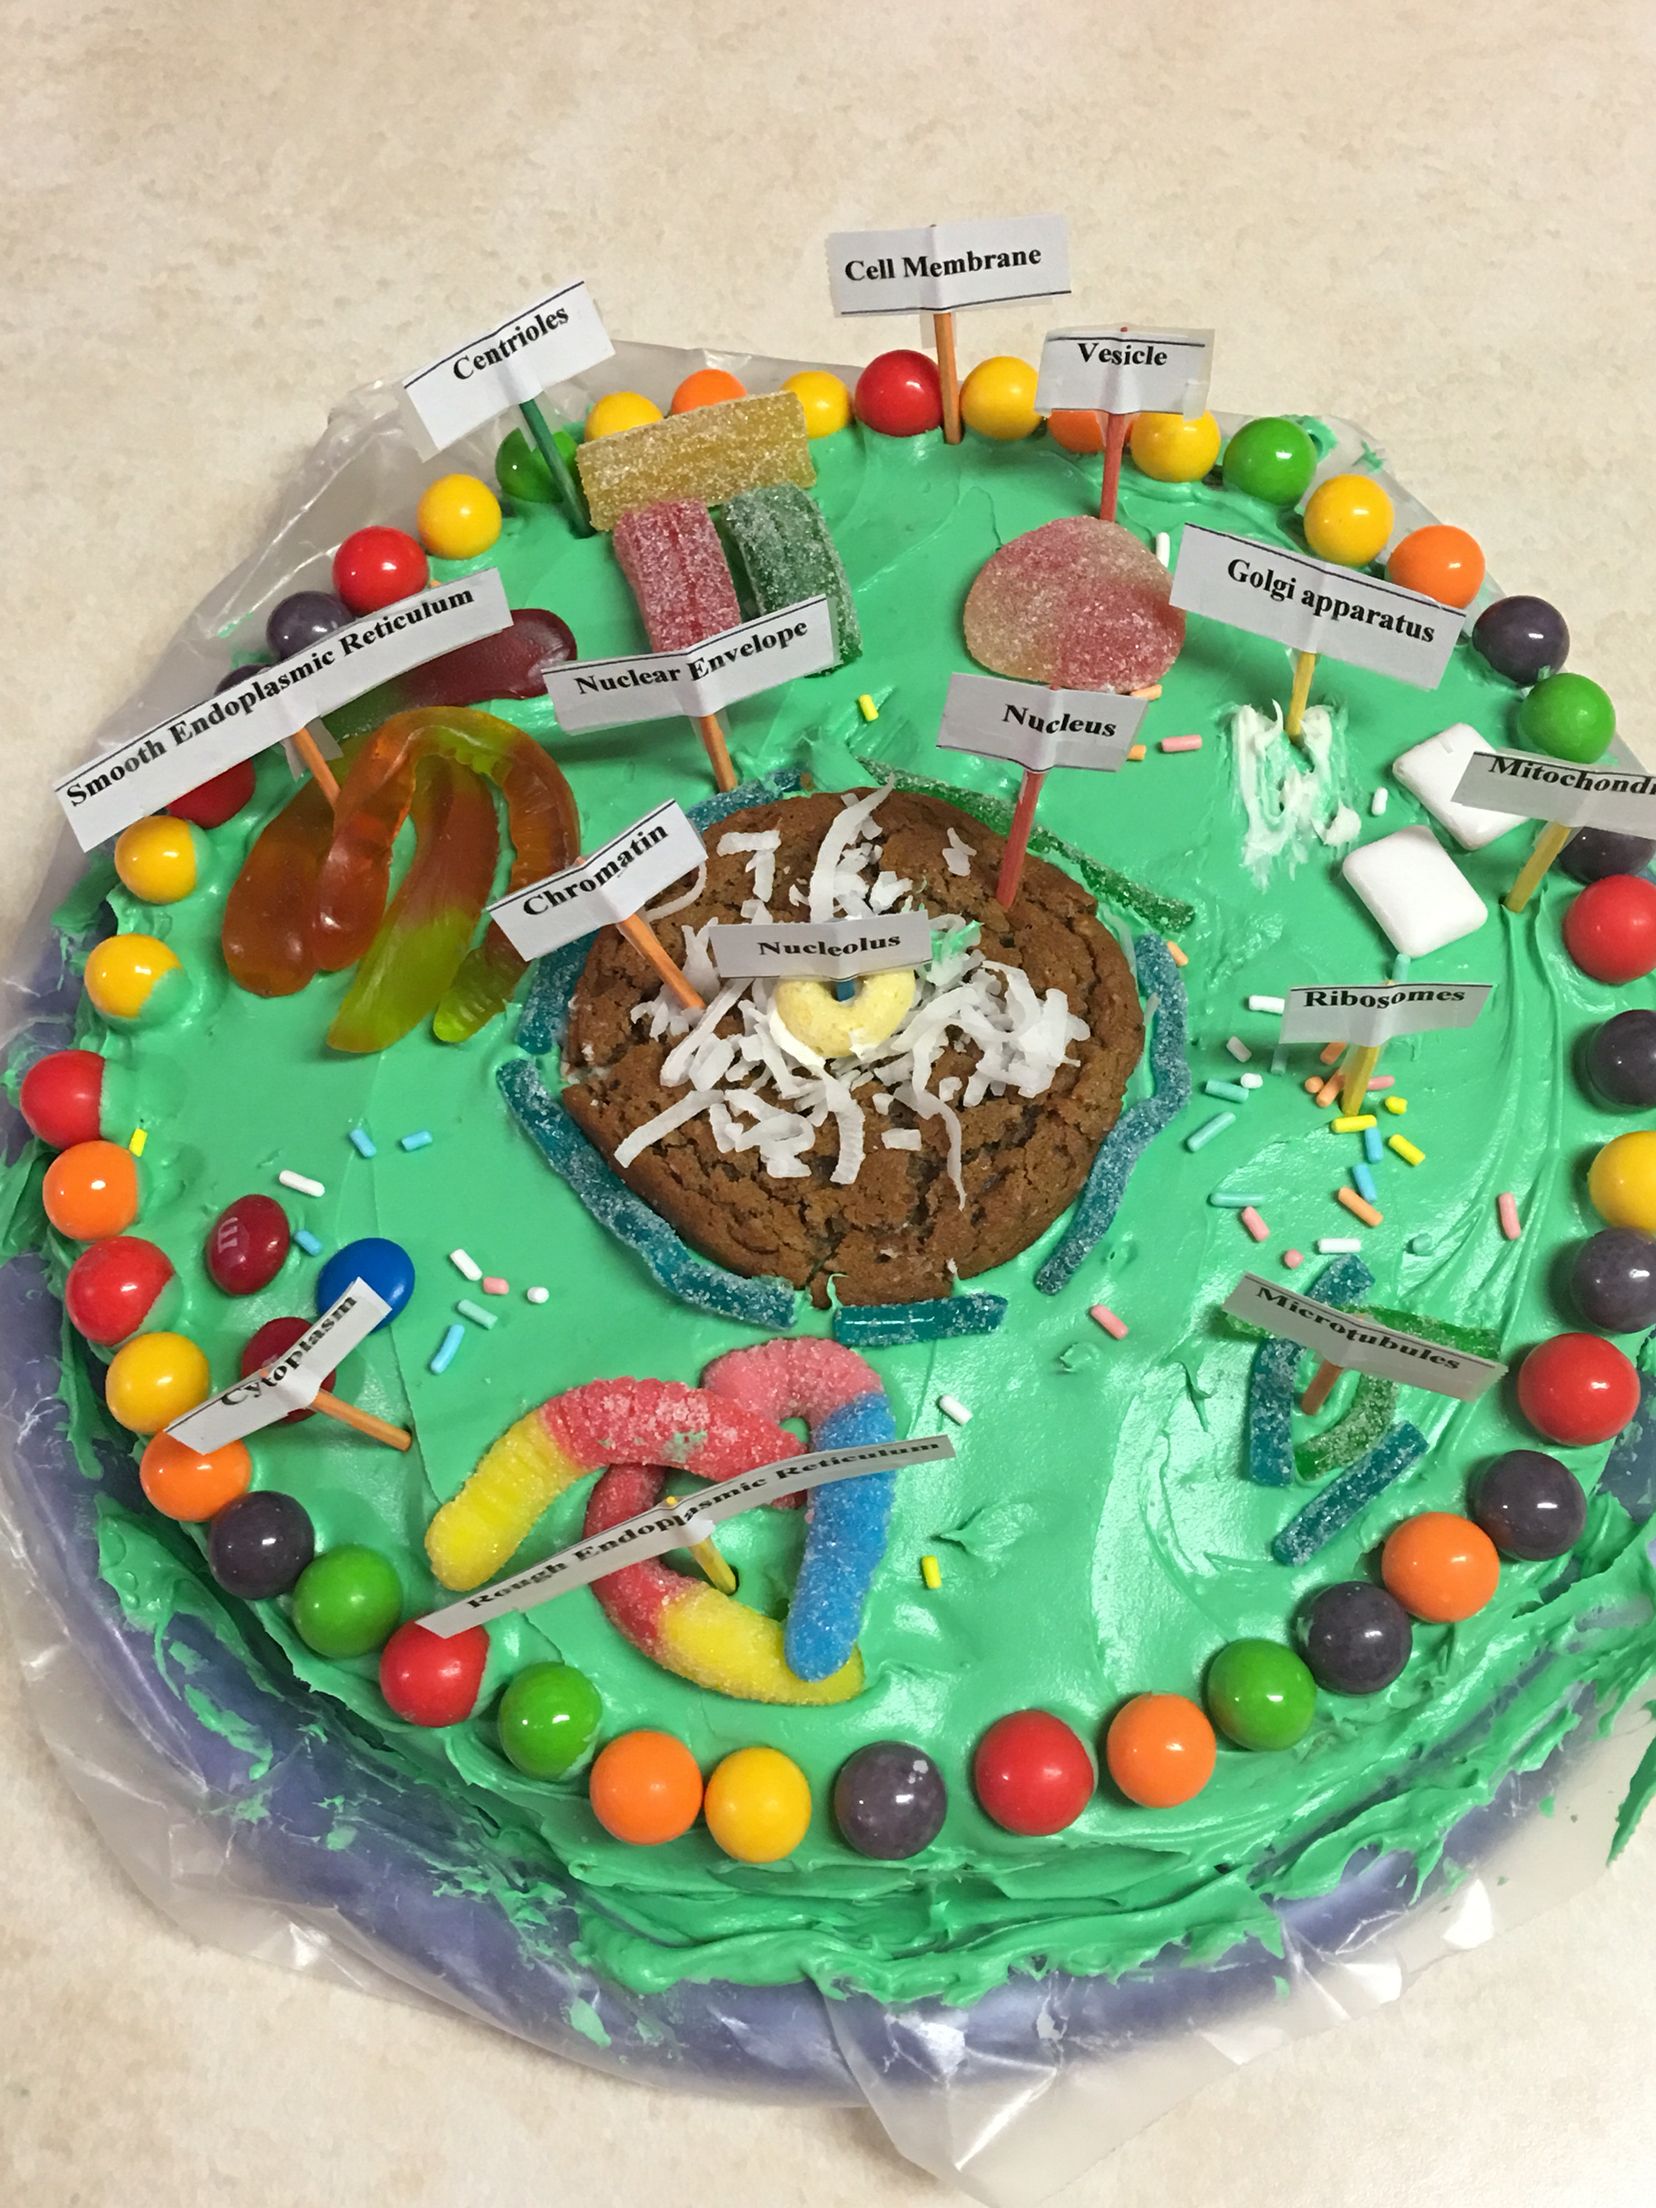 3d plant cell projects kids